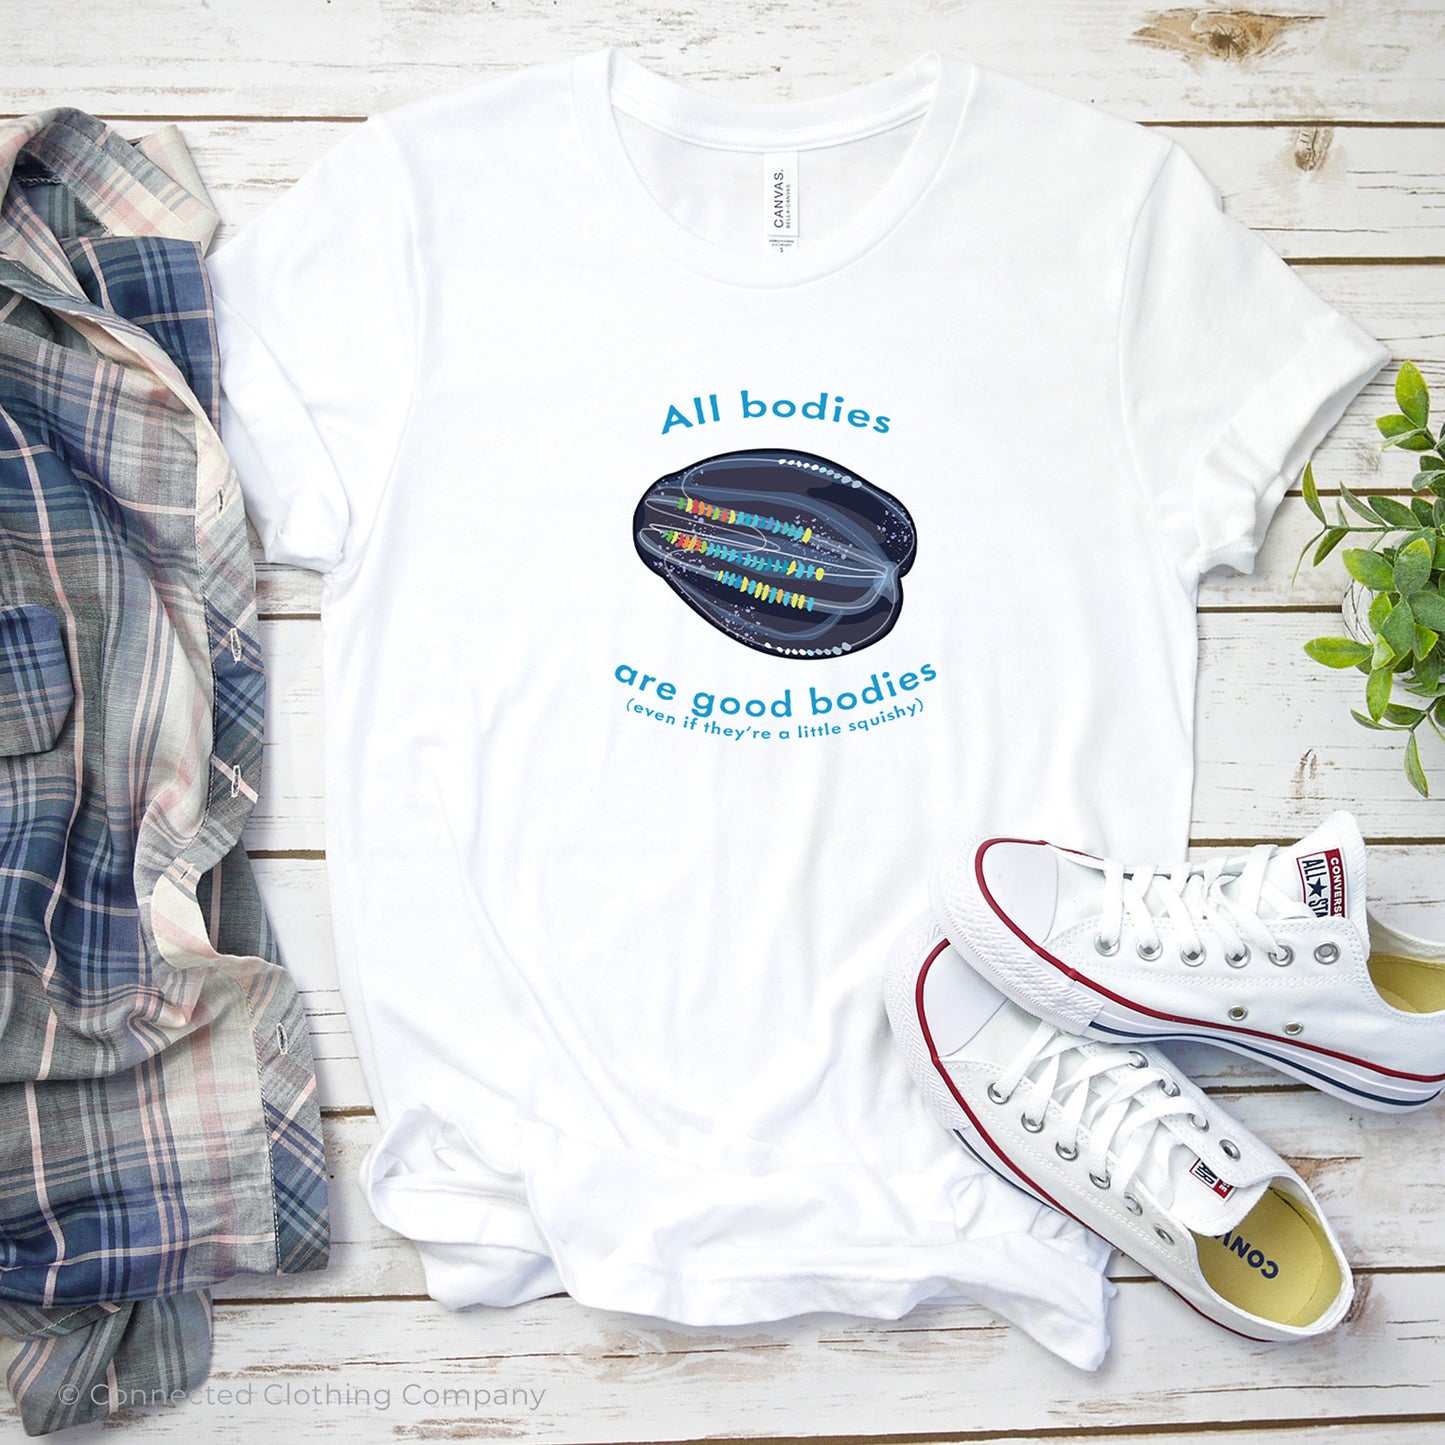 White All Bodies Are Good Bodies Tee reads "All bodies are good bodies (even if they're a little squishy)." and has a comb jelly ctenophore illustration - Connected Clothing Company - Ethically and Sustainably Made - 10% donated to Mission Blue ocean conservation